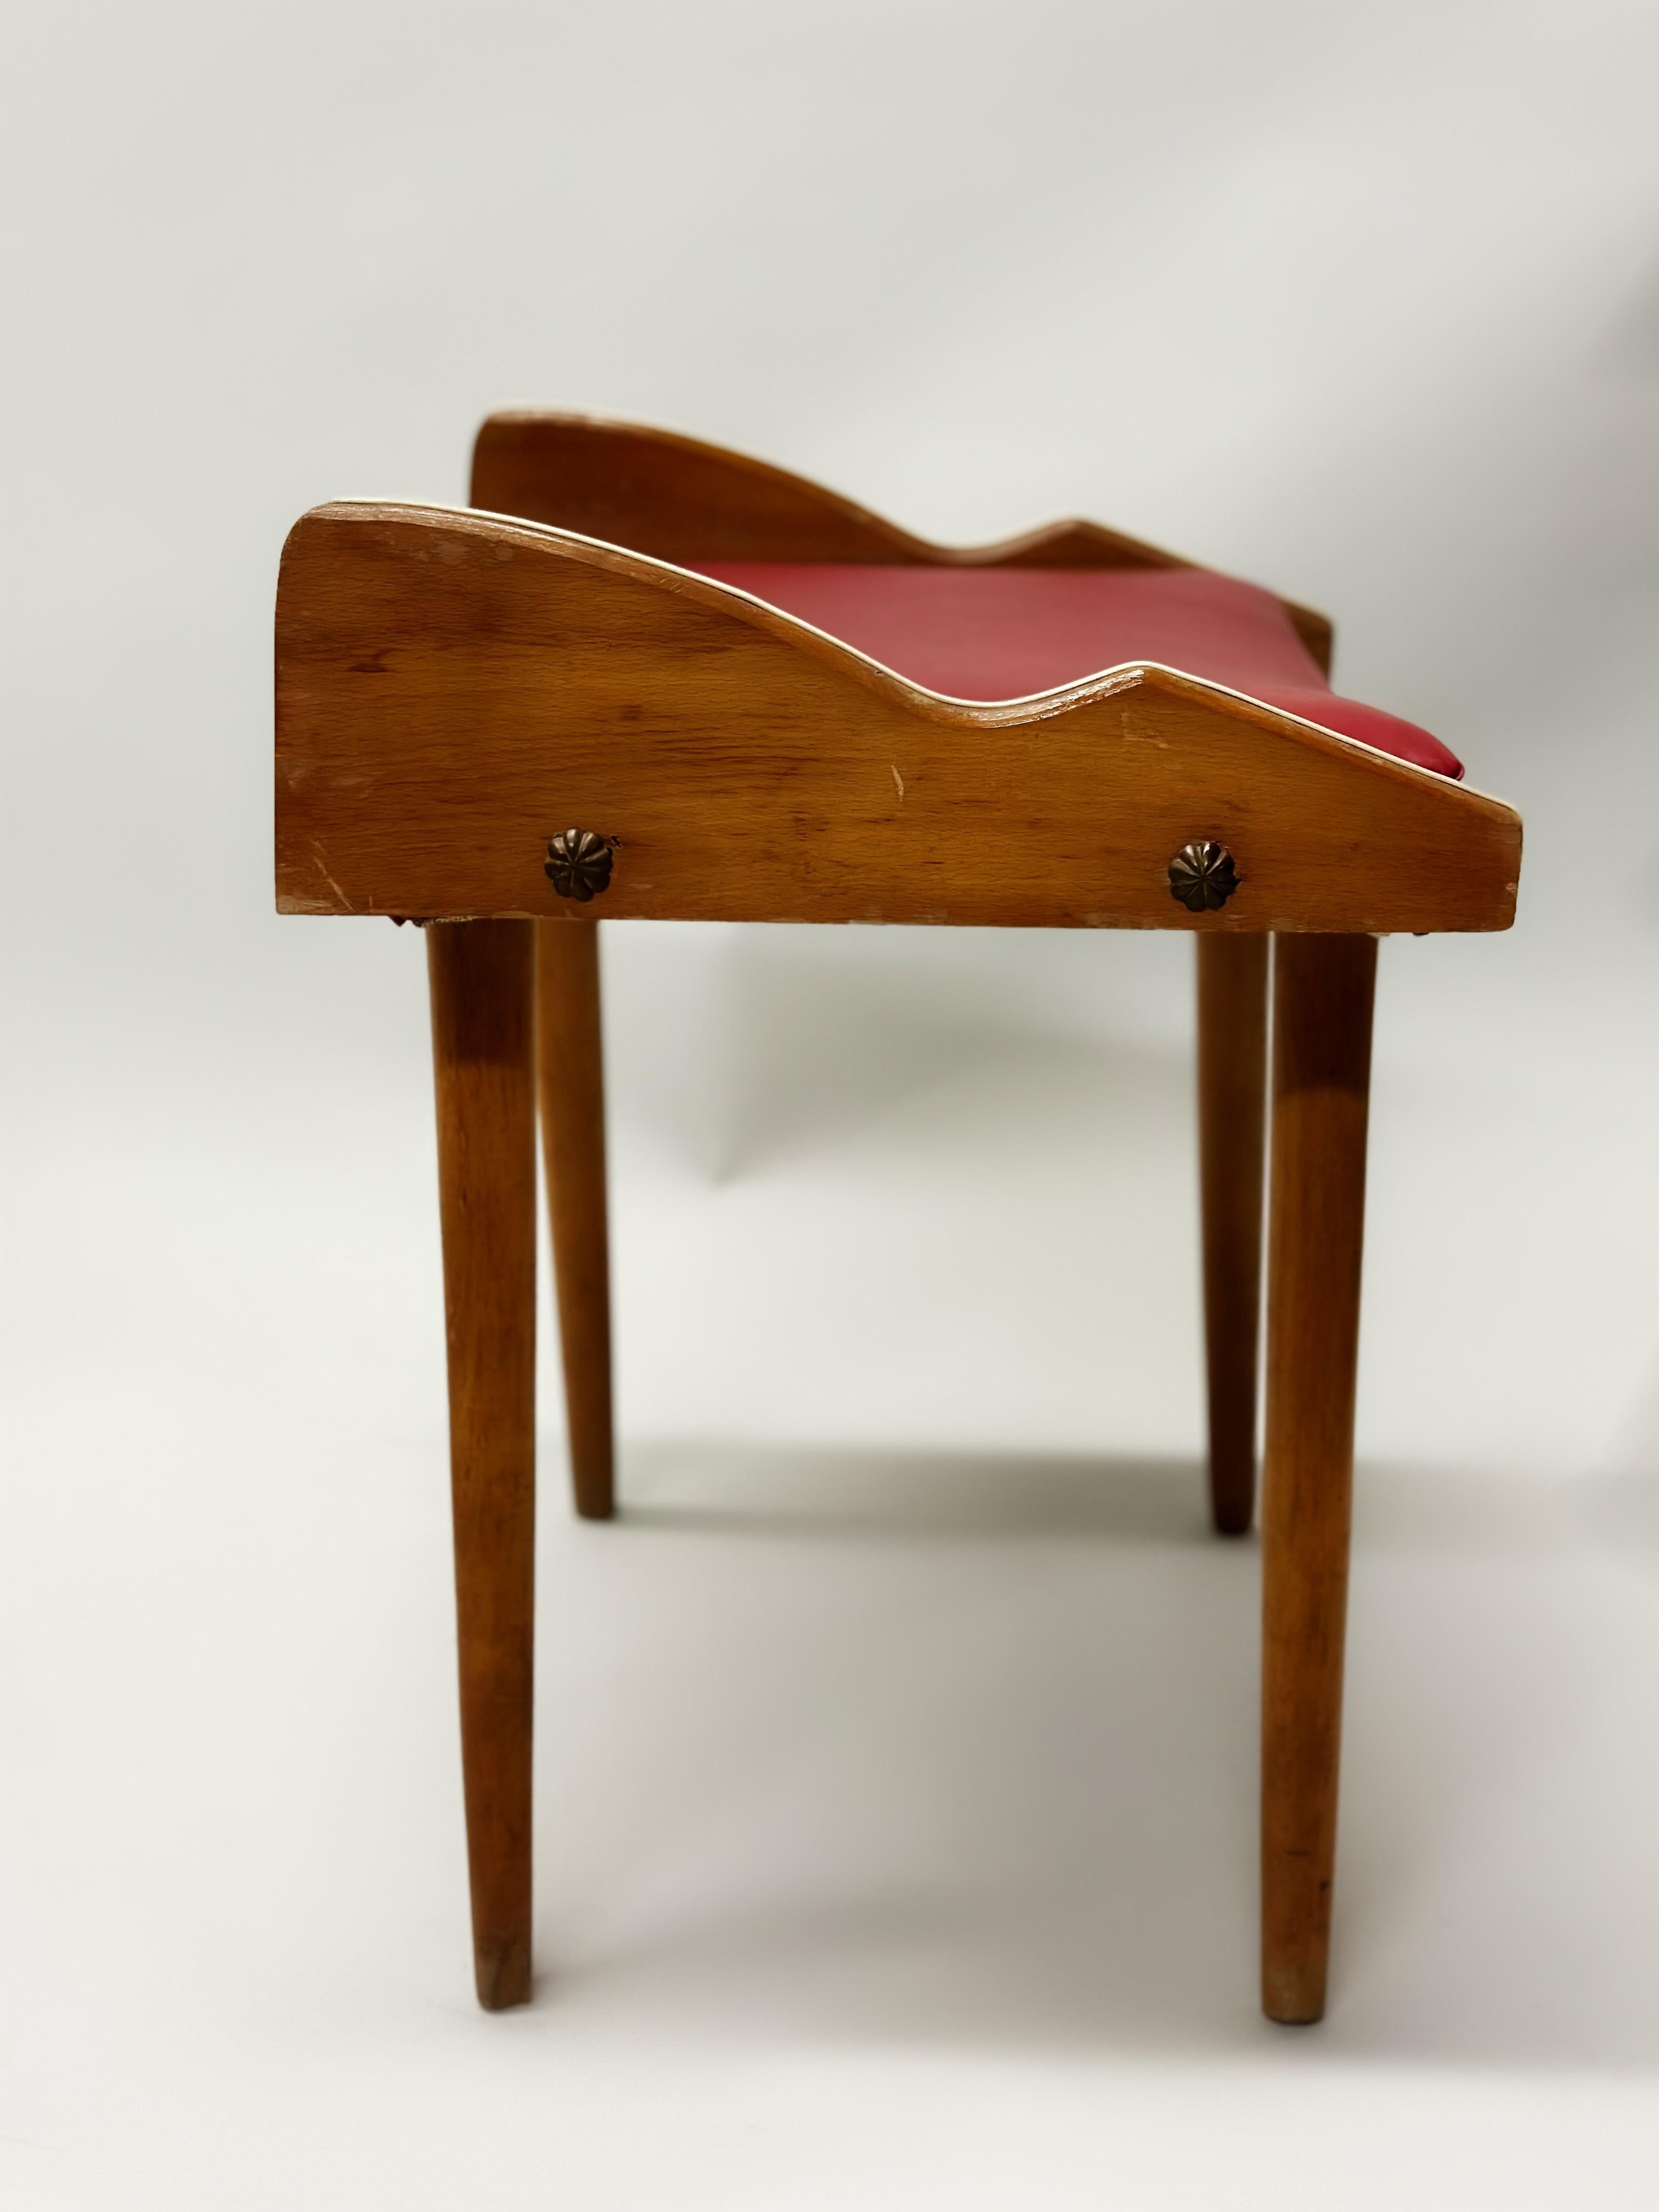 Pair of Italian Mid-Century Modern Wood Benches / Stools Attributed to Gio Ponti For Sale 6